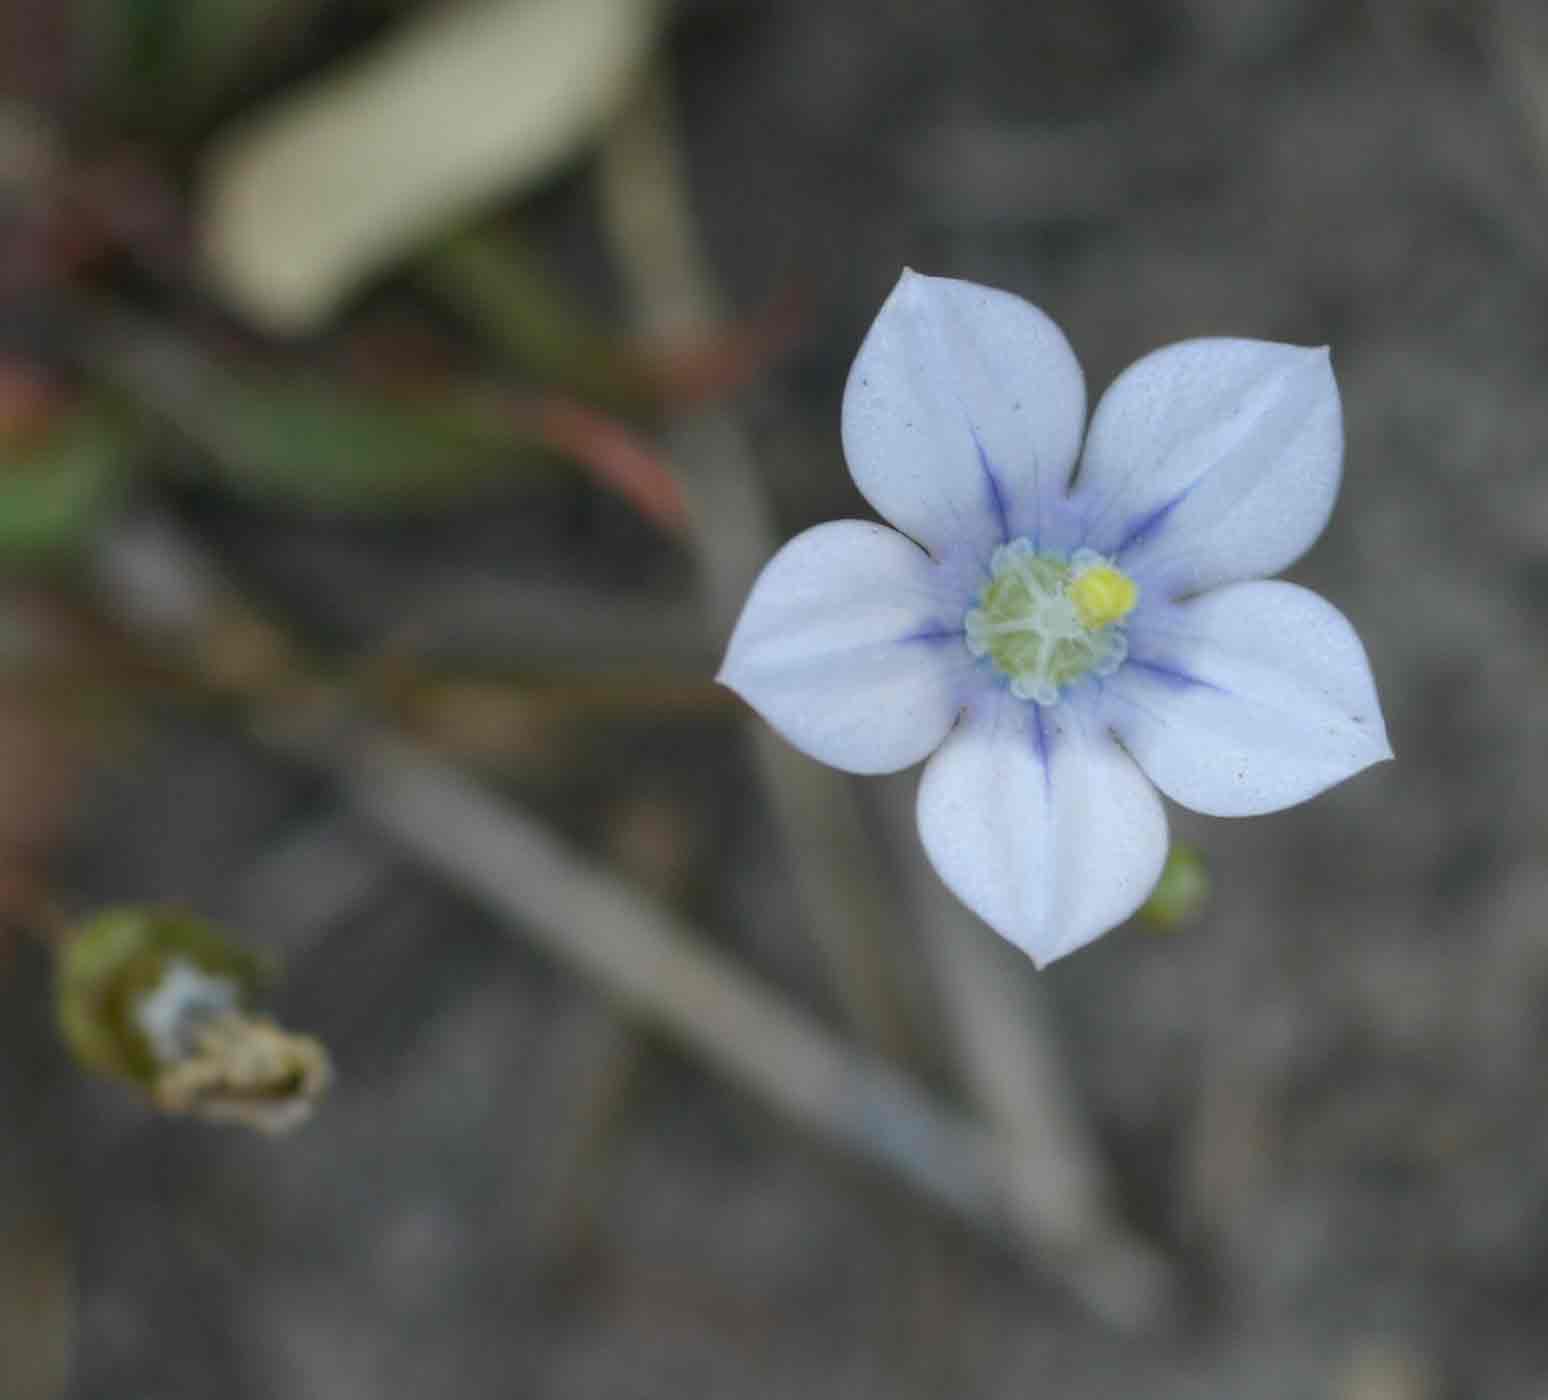 Wahlenbergia androsacea